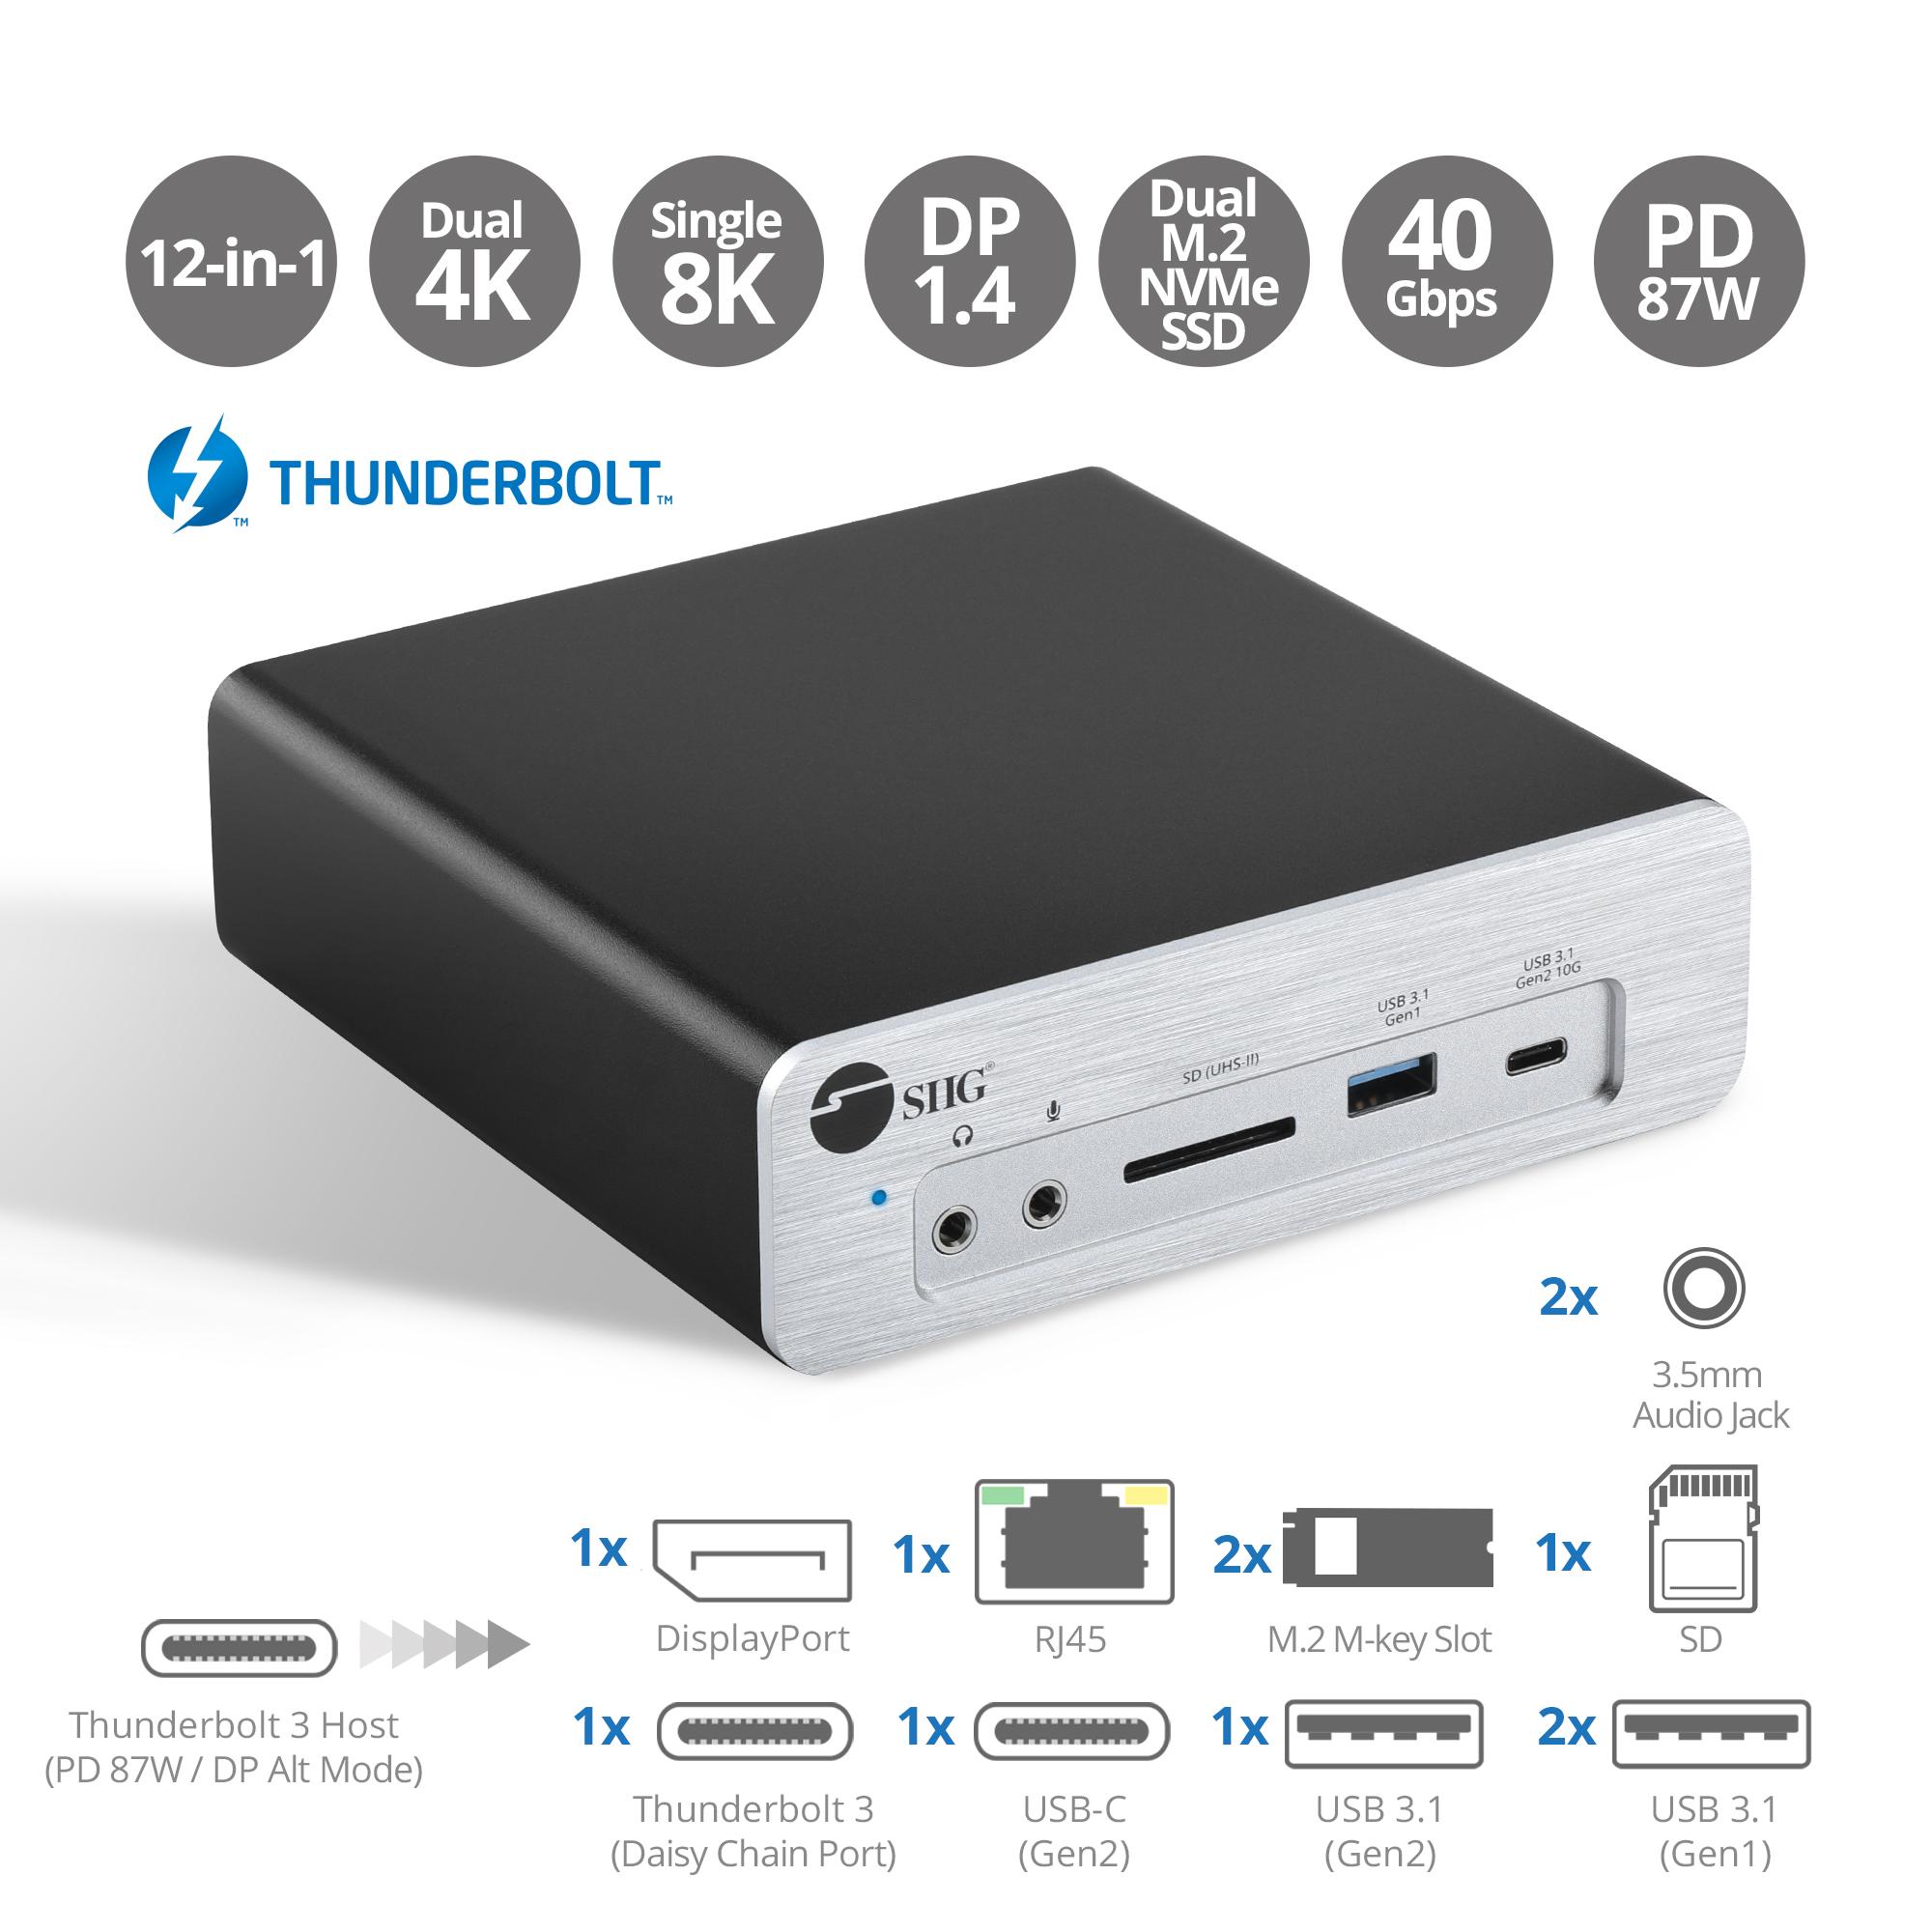 Thunderbolt 3 DP 1.4 Docking Station with Dual M.2 NVMe SSD & PD